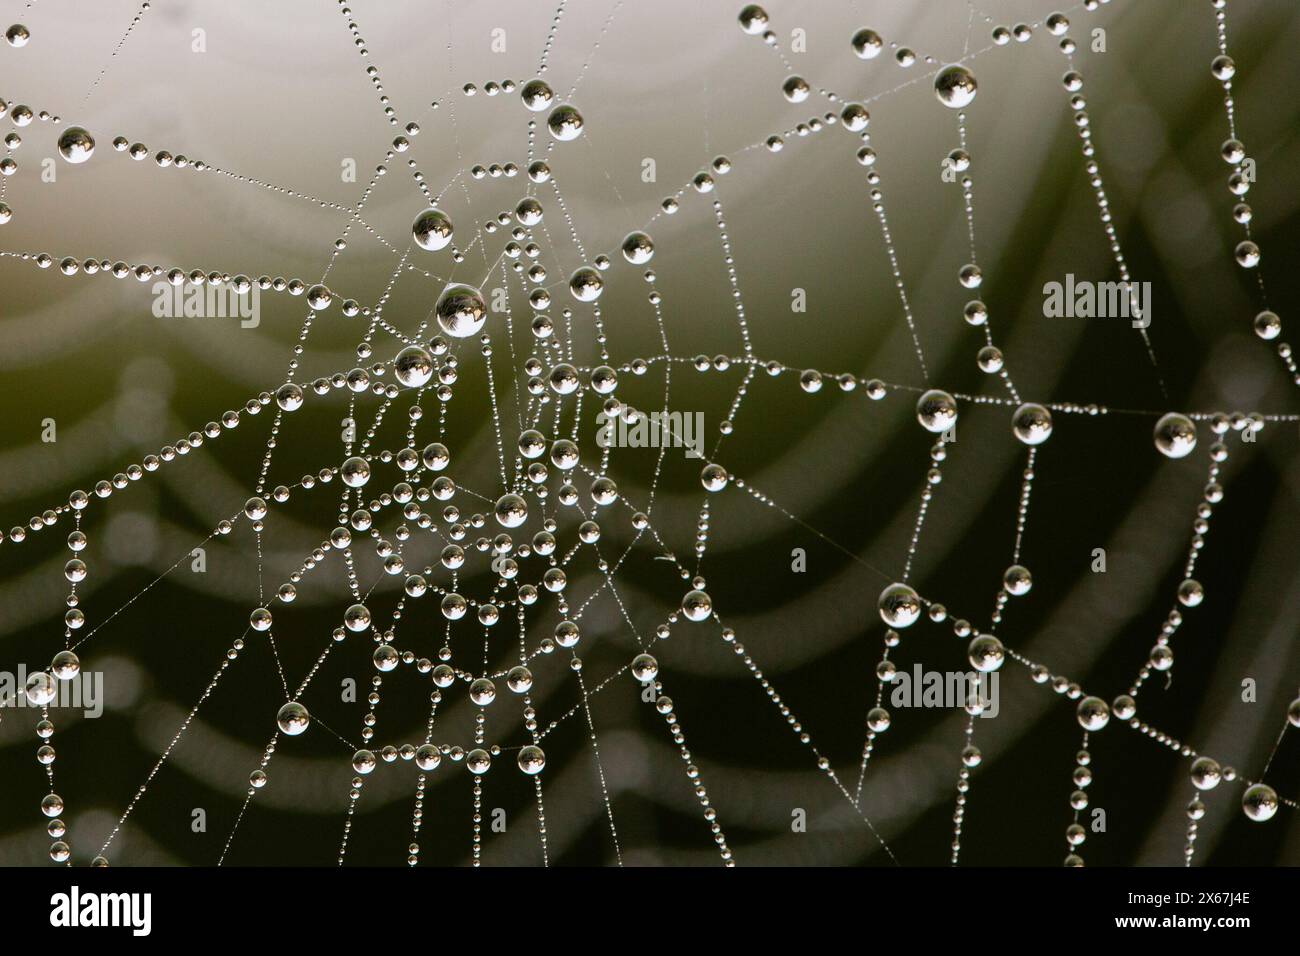 Close-up of drops in a spider's web against a dark background Stock Photo